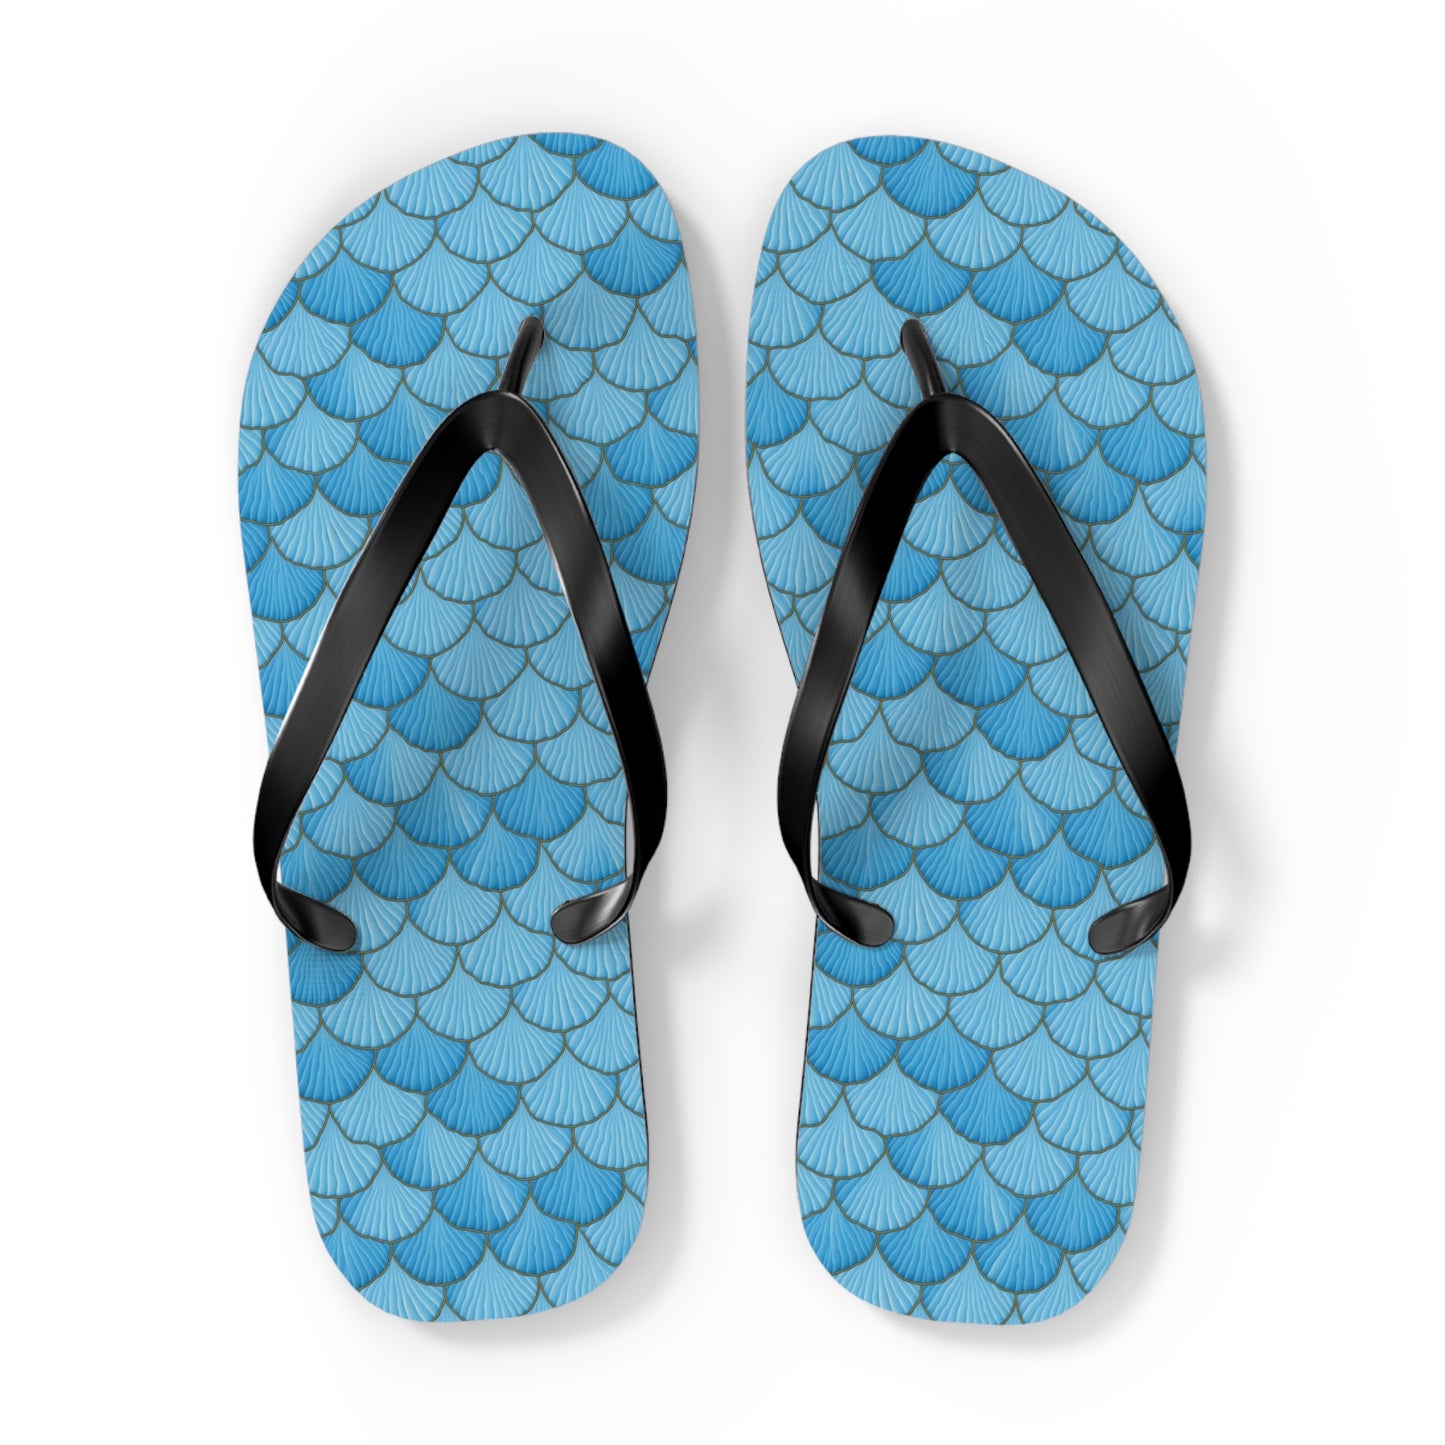 Get Your Flip Flop Game On - Stand Out with Custom Blue Seashell Mermaid Flip Flops! Beach, Home, Work School Fun